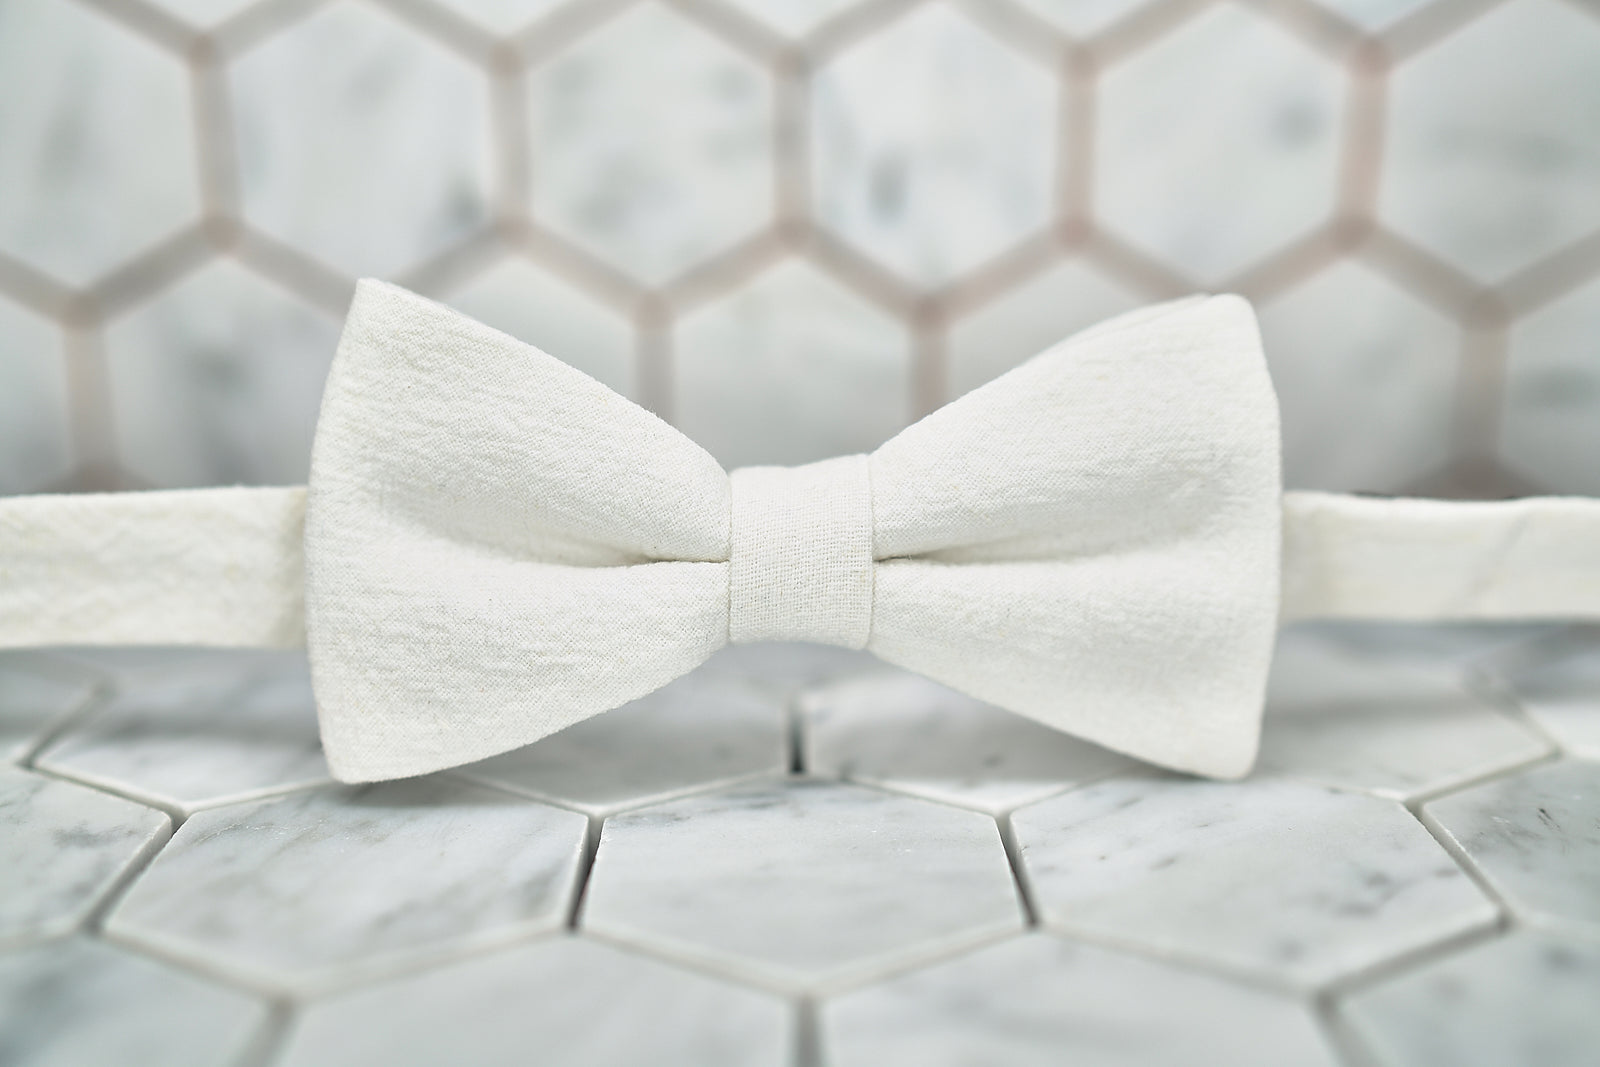 A front view of the DM Al Pacino white linen bow tie against a hexagon background.